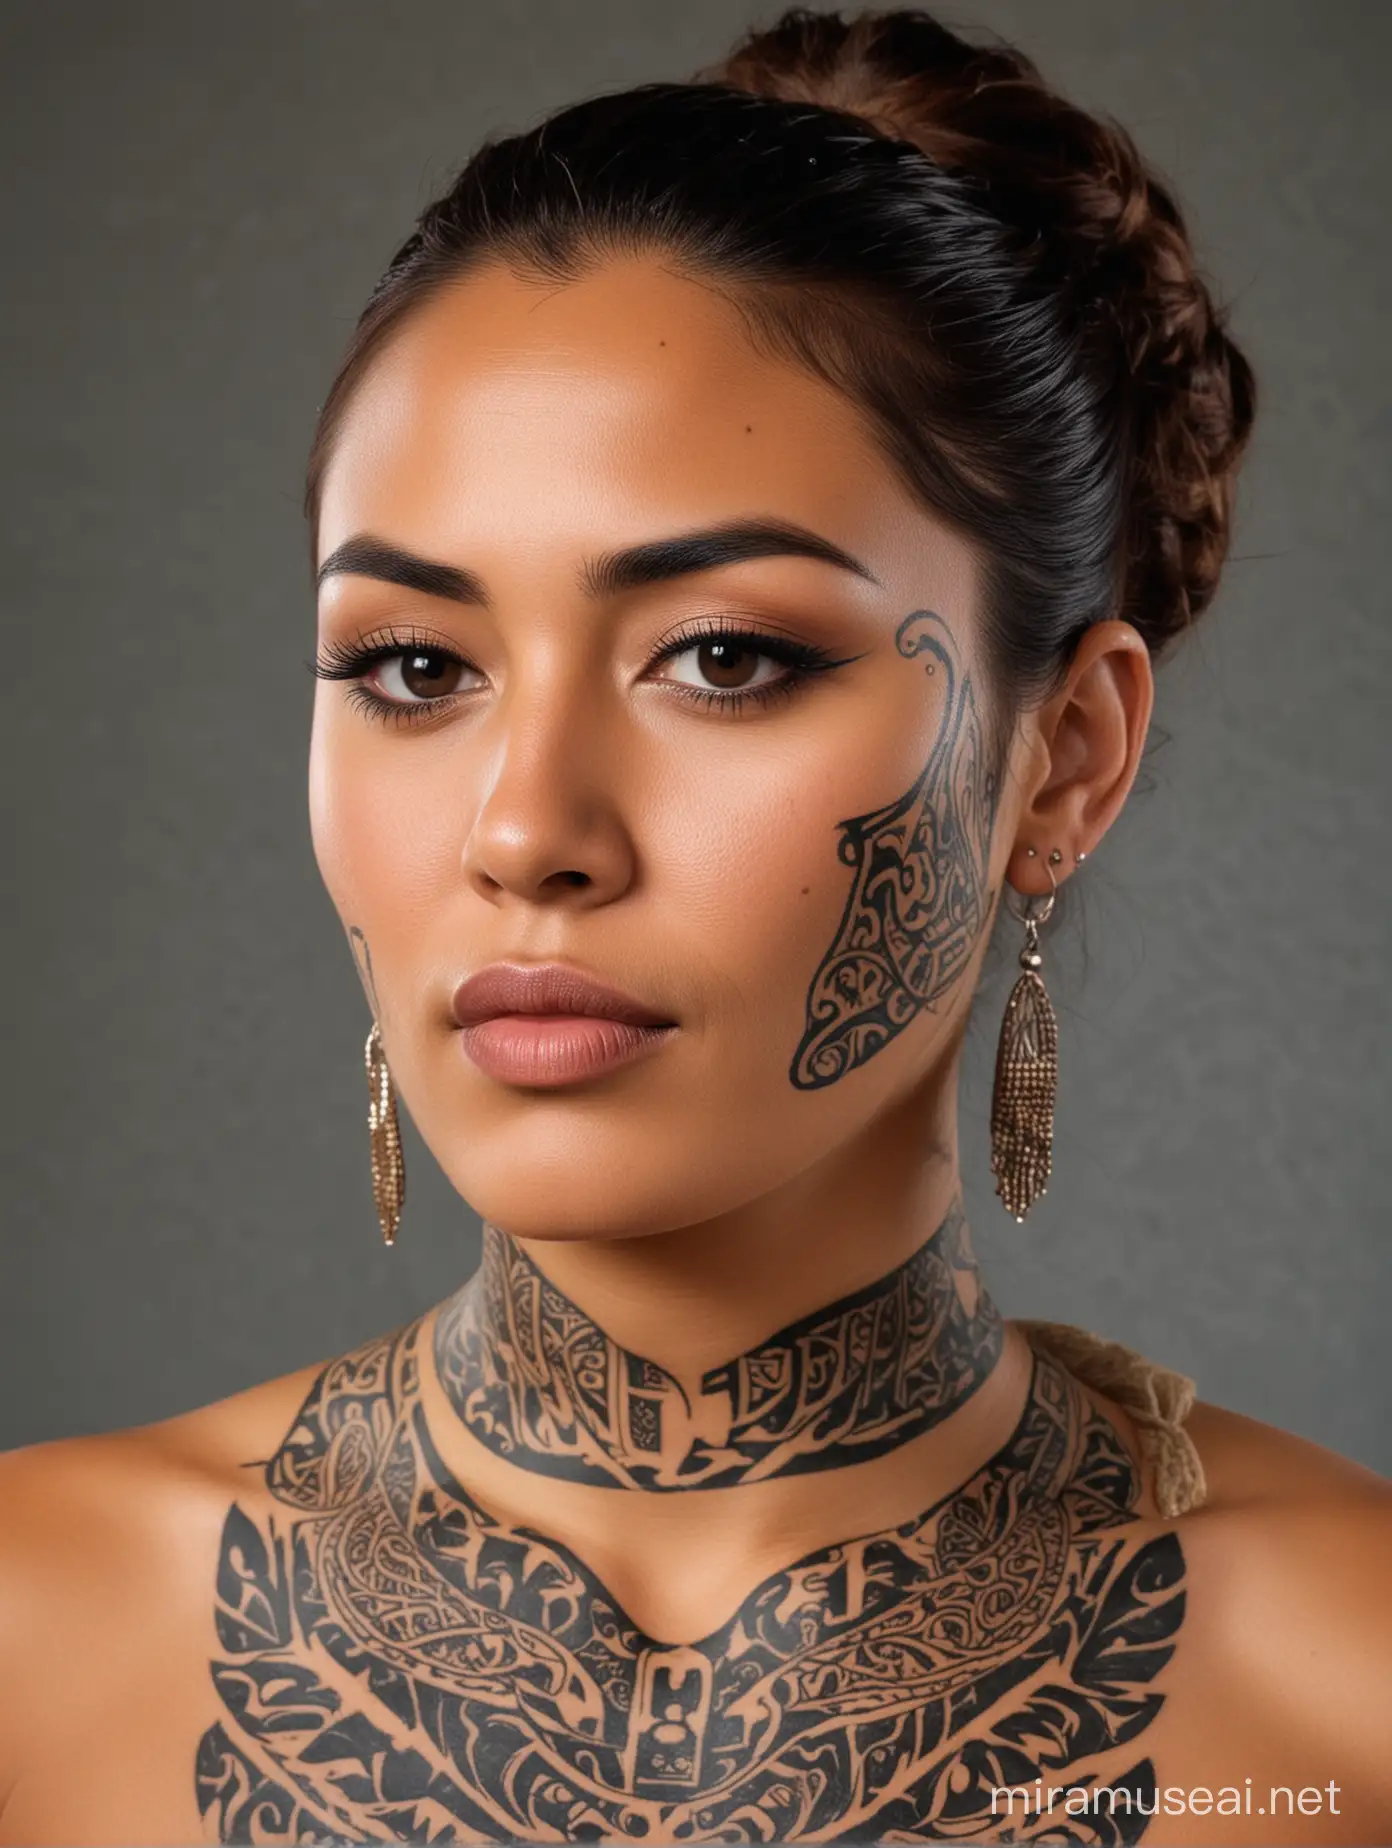 Sexy Maori lady with a traditional tattoo on her chin.